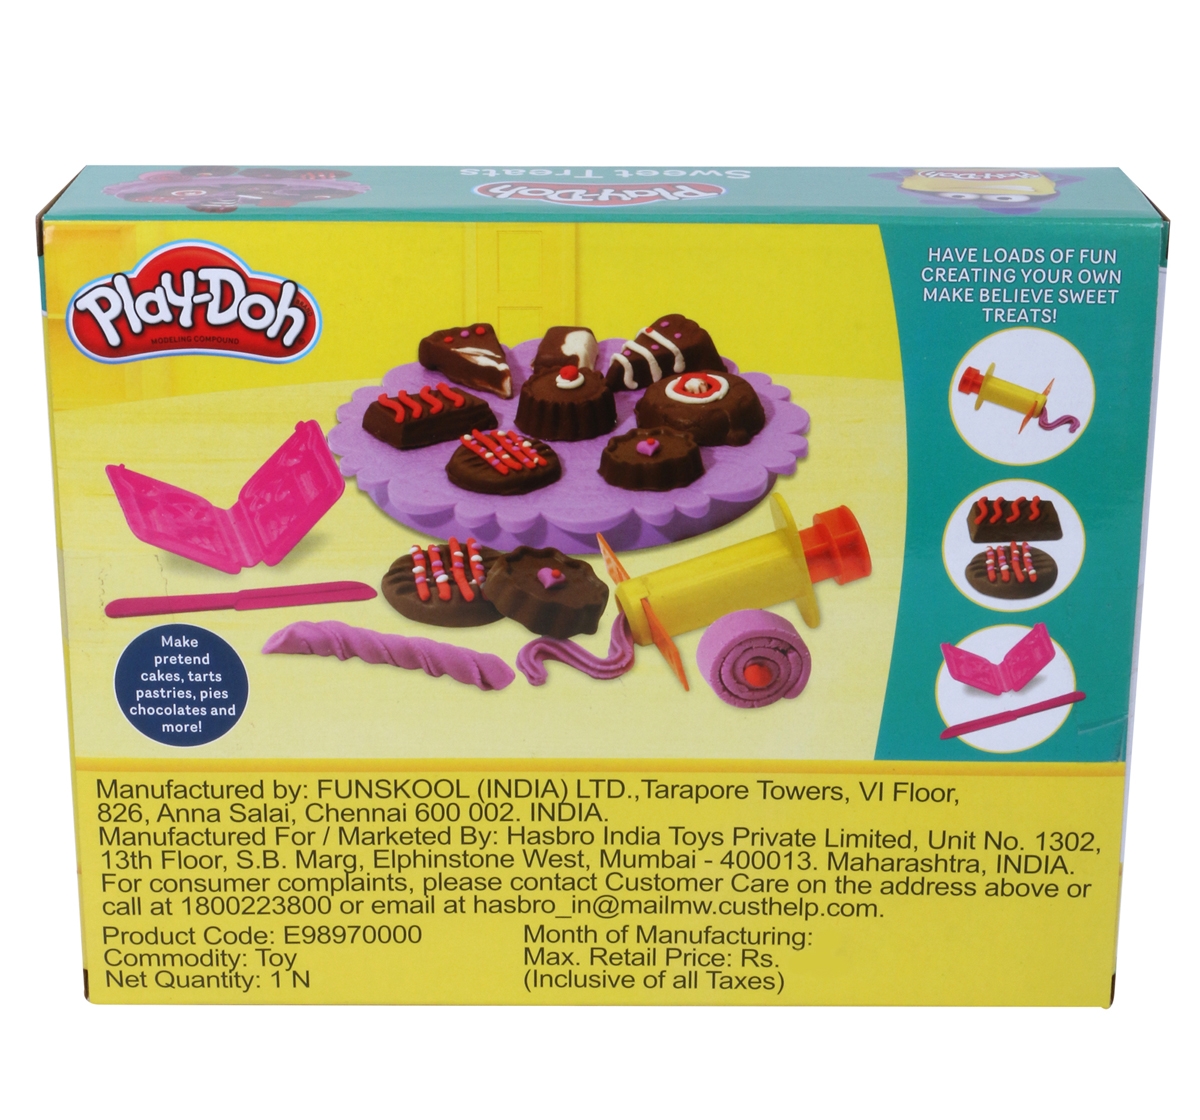 Play-Doh | Play Doh Sweet Treats Playset for Kids 3Y+, Multicolour 4